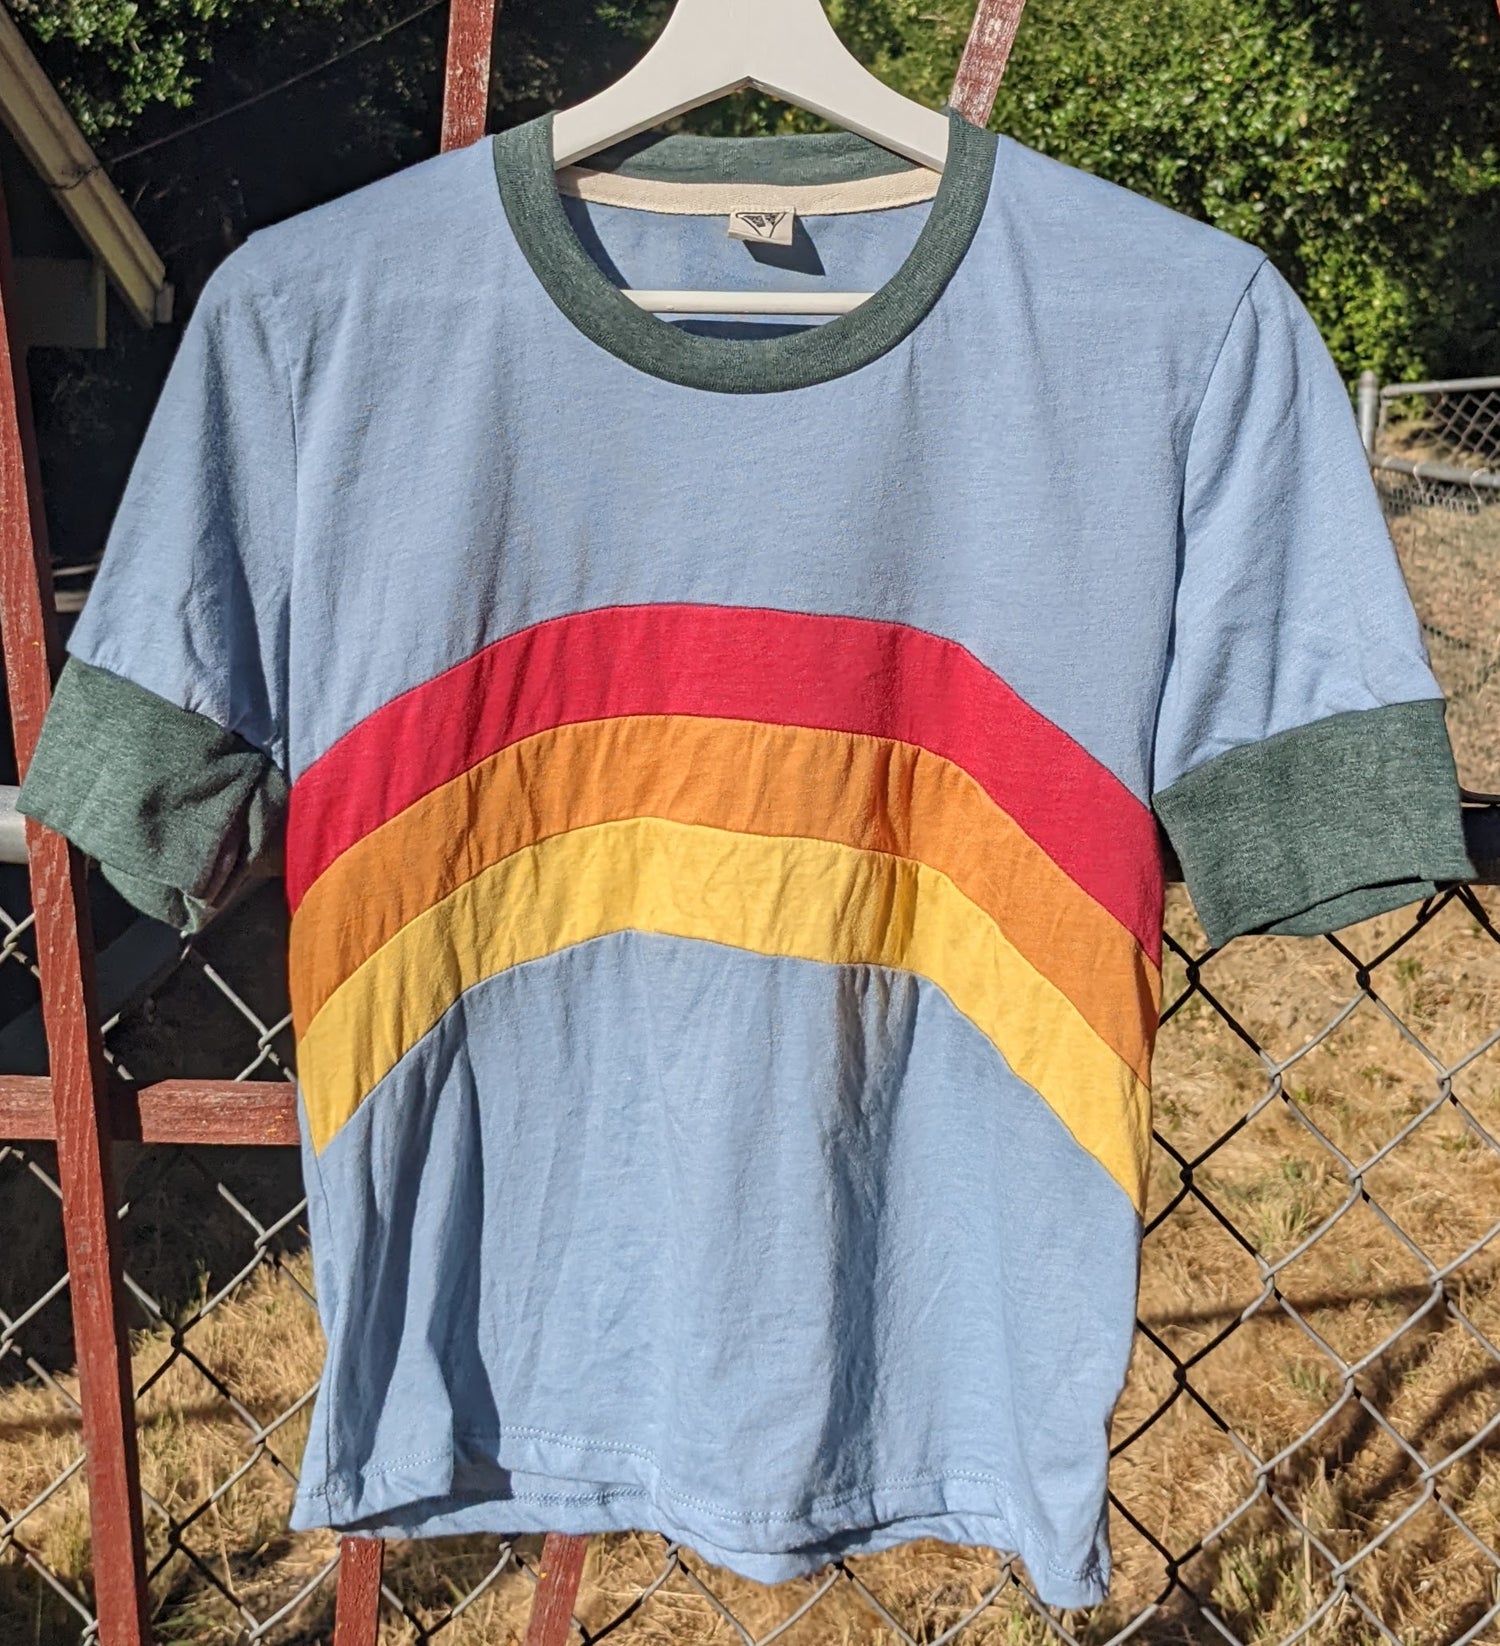 Blue and green shirt by Camp Collection with rainbow on front,  created by Jackie from Present